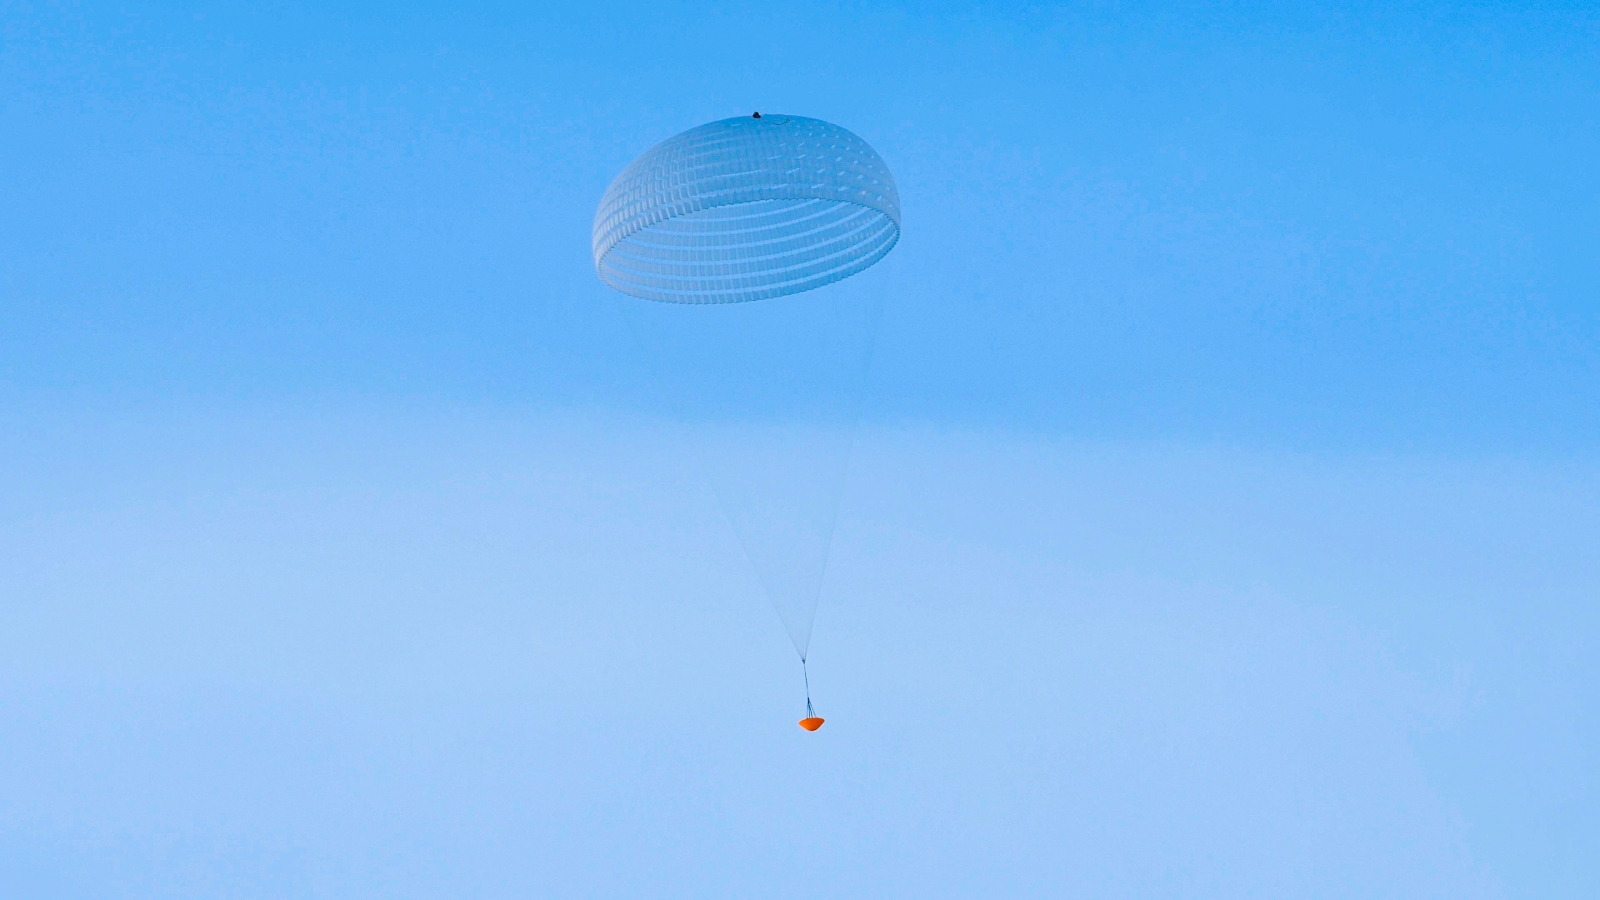 ESA tests its giant Mars mission parachute | DeviceDaily.com